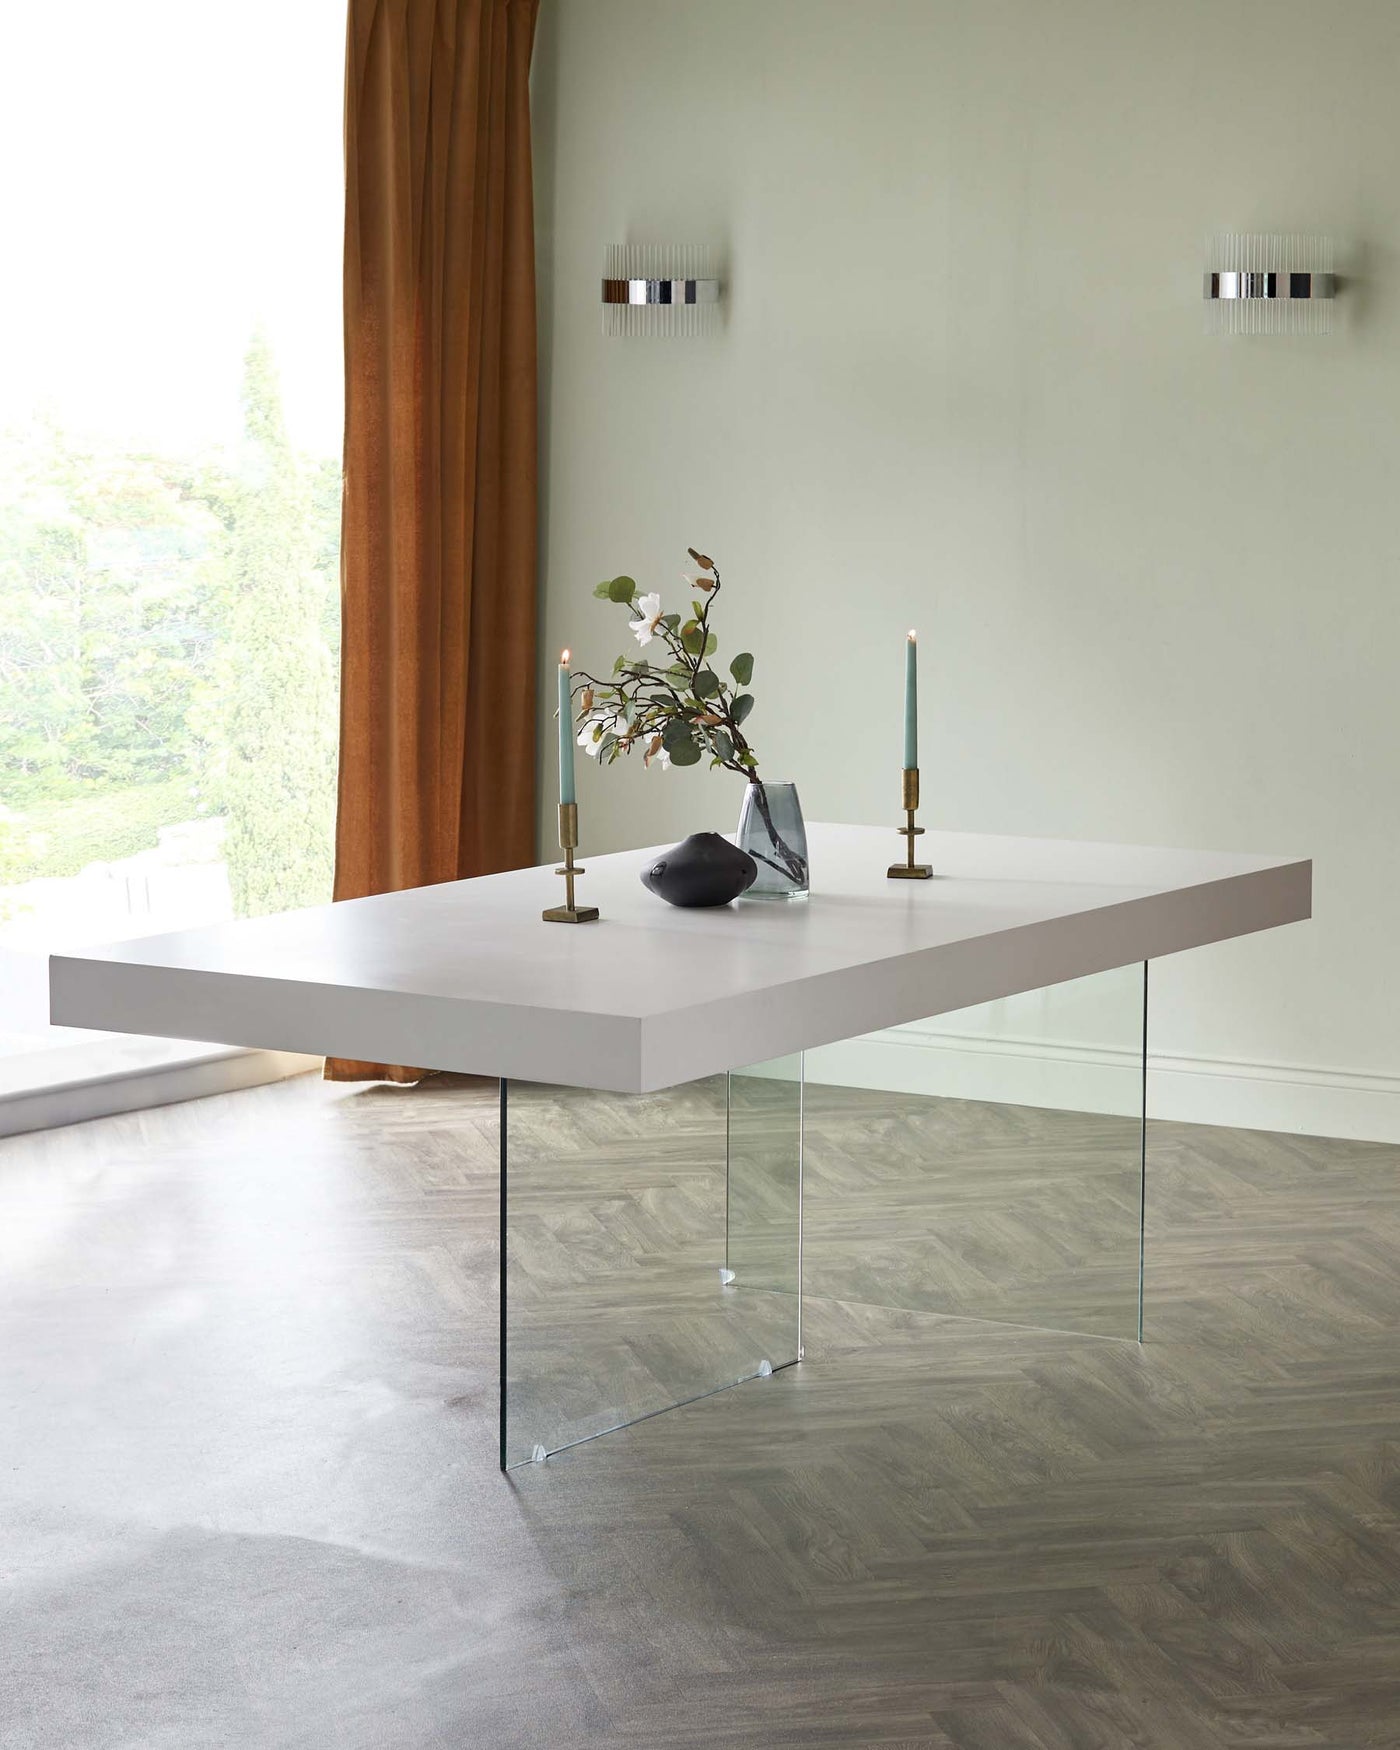 A modern minimalist dining table with a rectangular light grey top supported by two clear glass legs, set in a contemporary room with a view of greenery through a window.